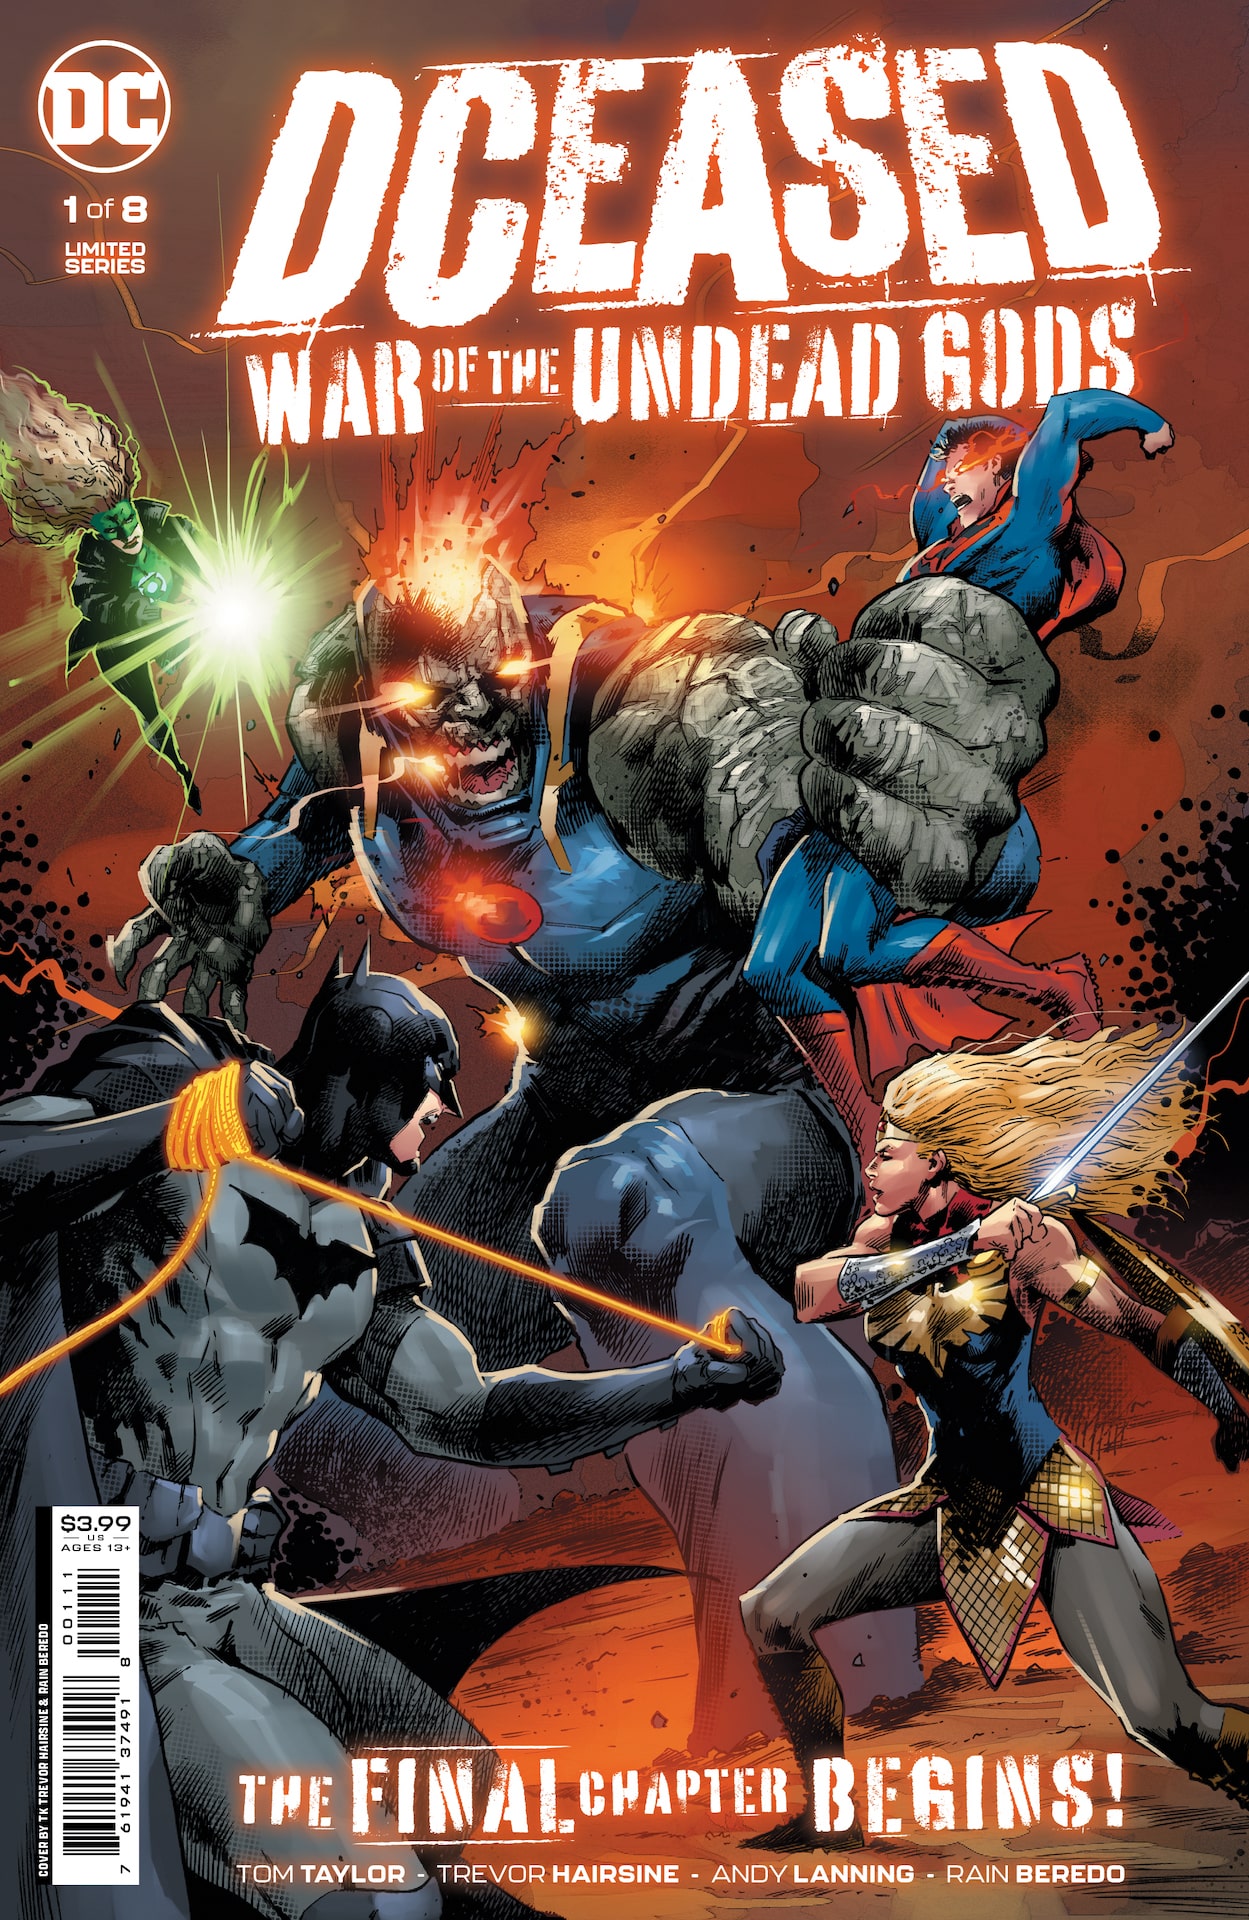 'DCeased: War of the Undead Gods' marks final chapter for iconic series